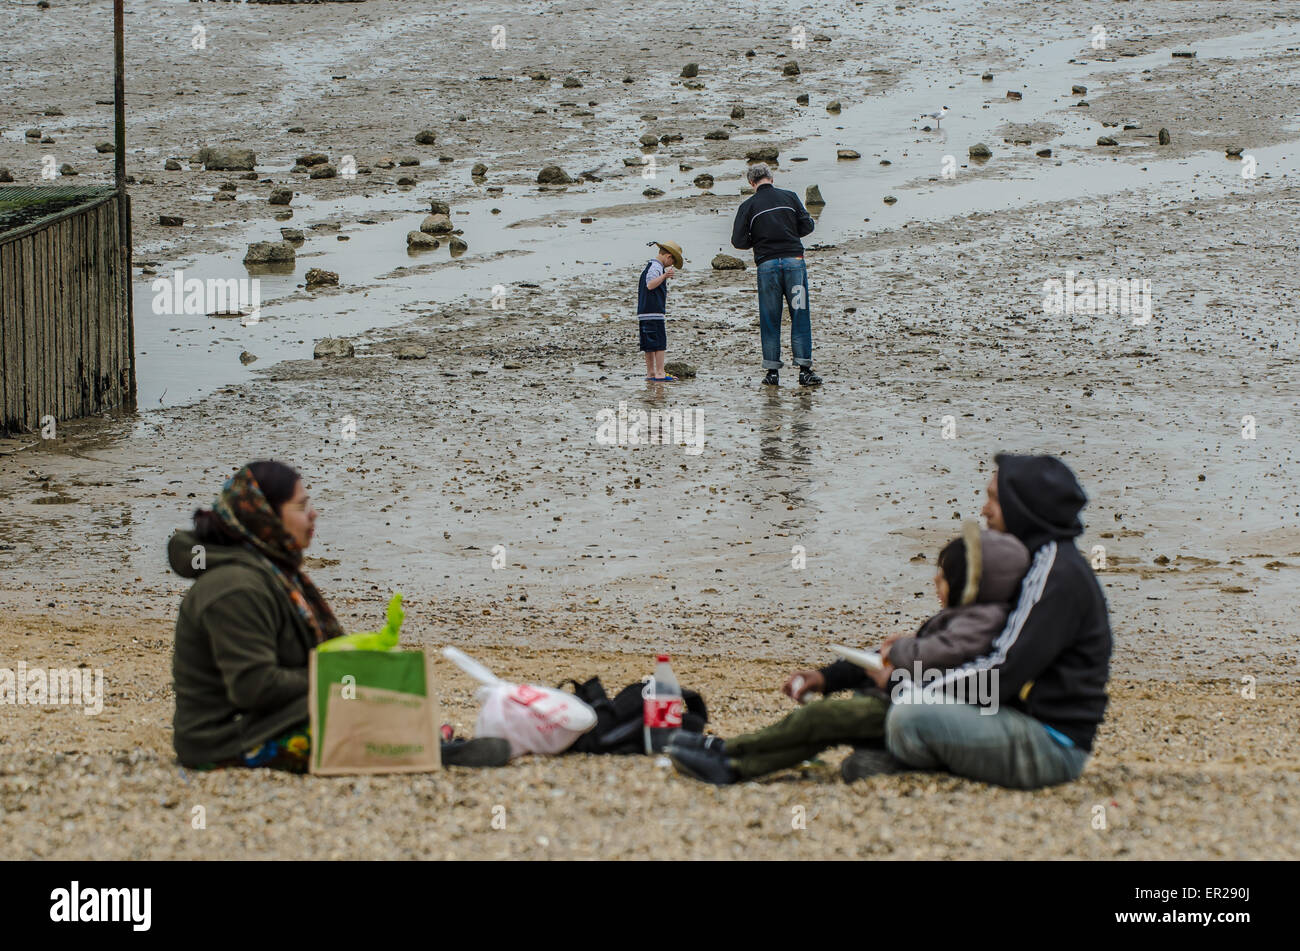 Visitors to the Southend-on-Sea, Essex seaside resort on the Bank Holiday Monday make the best of the overcast weather on the beach Stock Photo